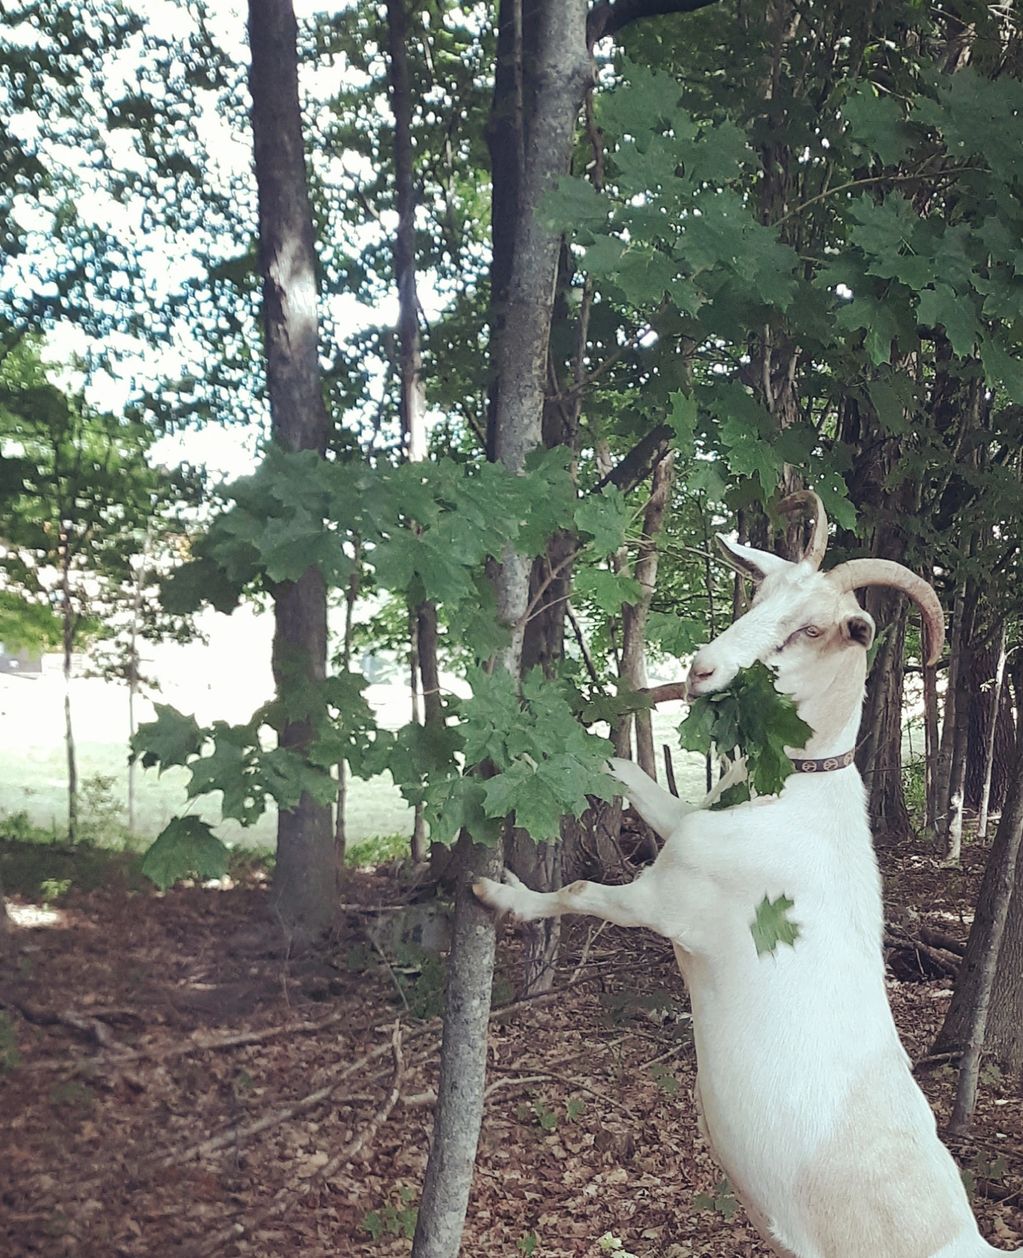 Goat leaning on tree